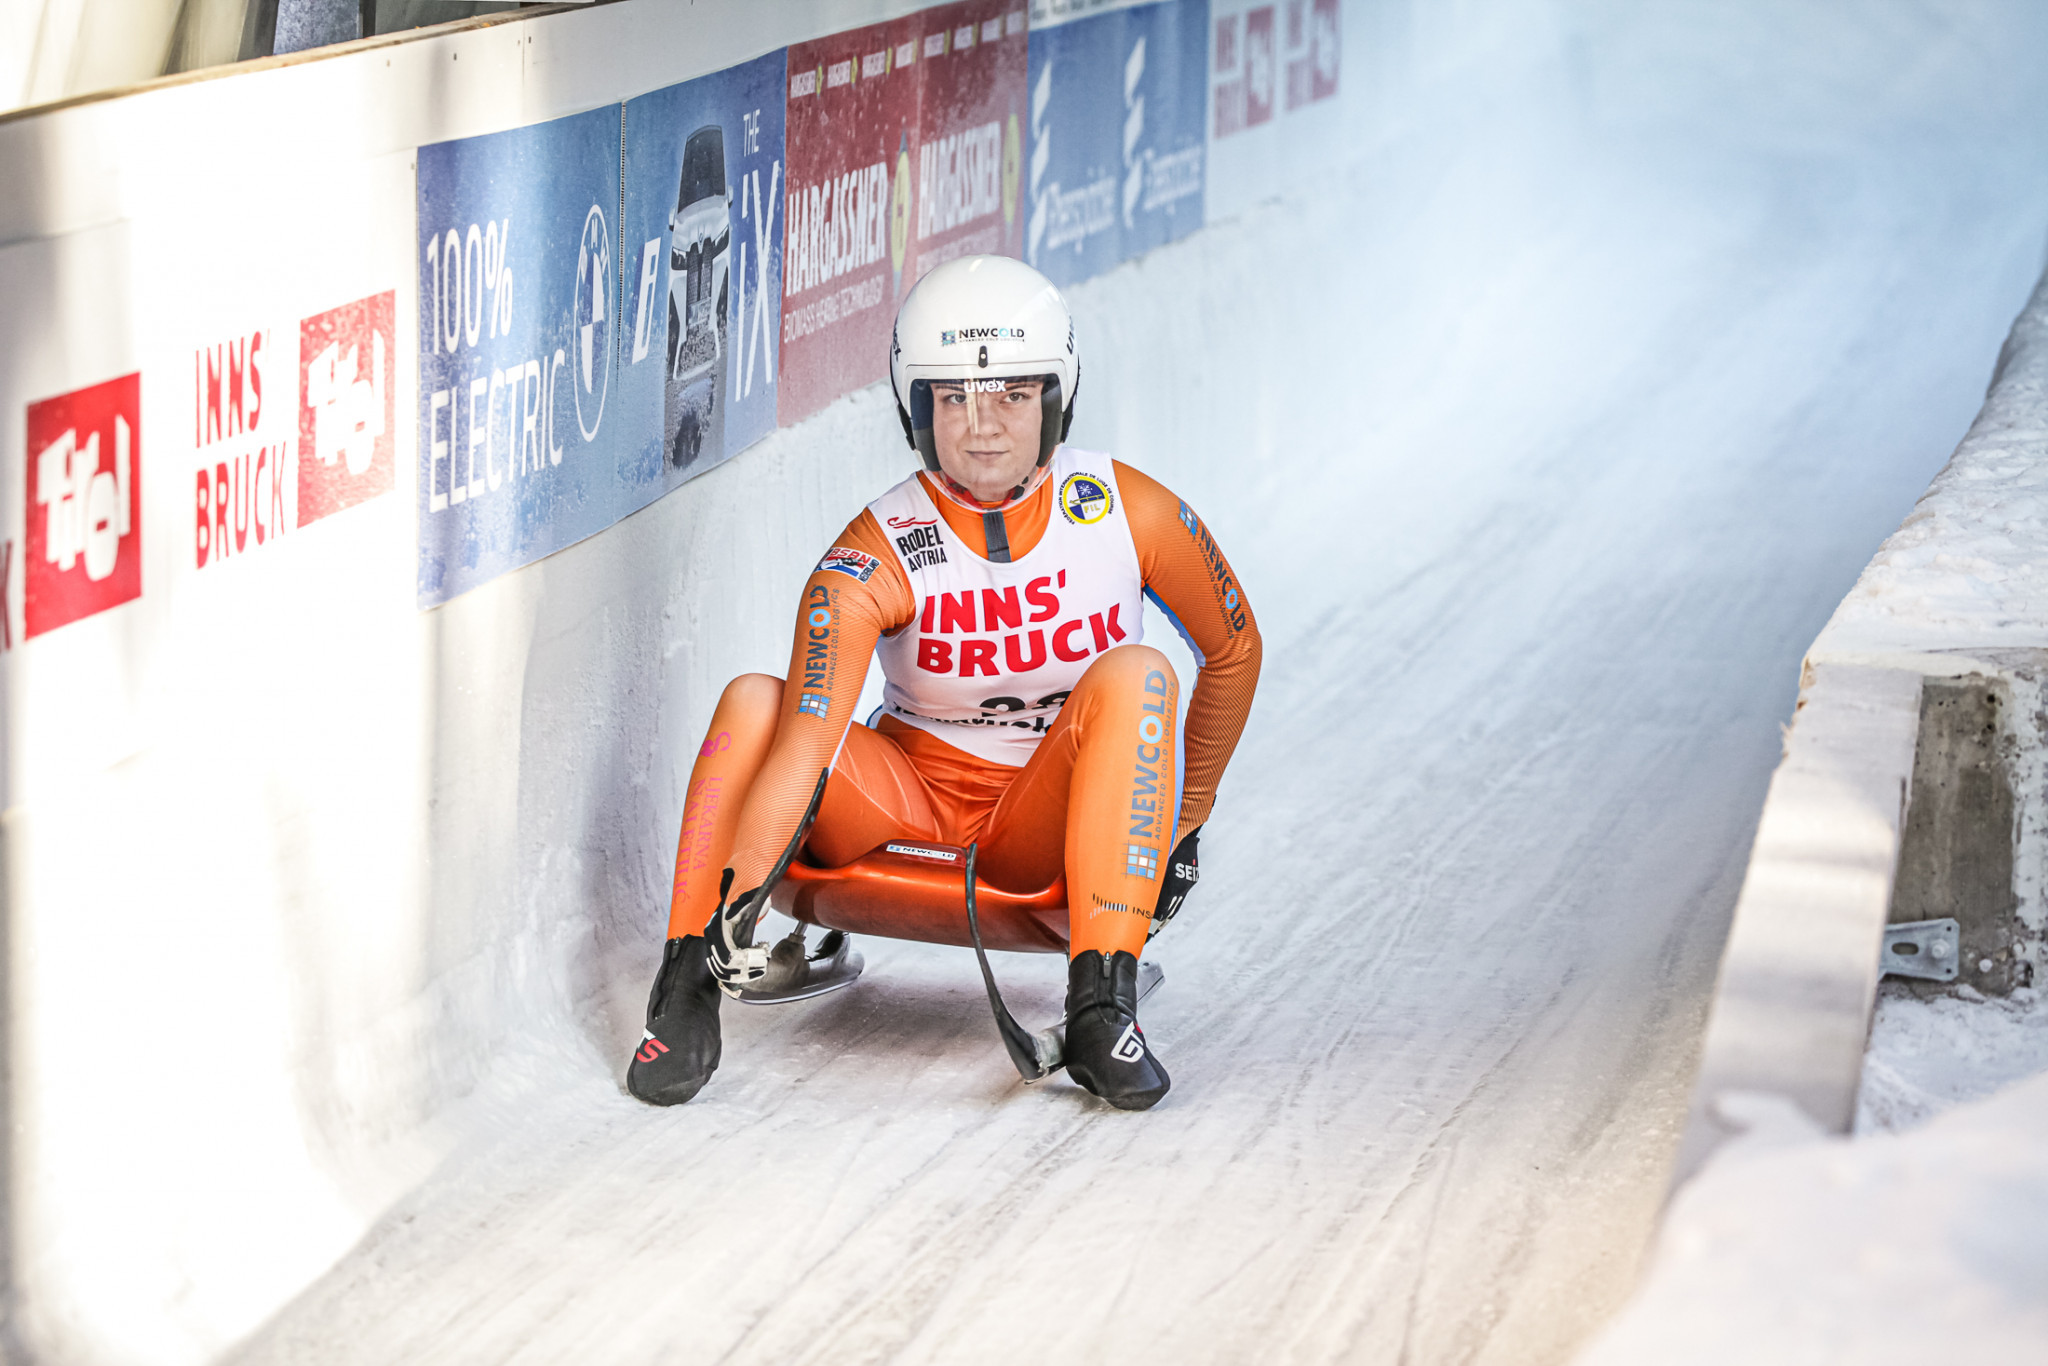 Dania Obratov used to represent Croatia but switched to The Netherlands after a disagreement with the Croatian Luge Federation ©FIL